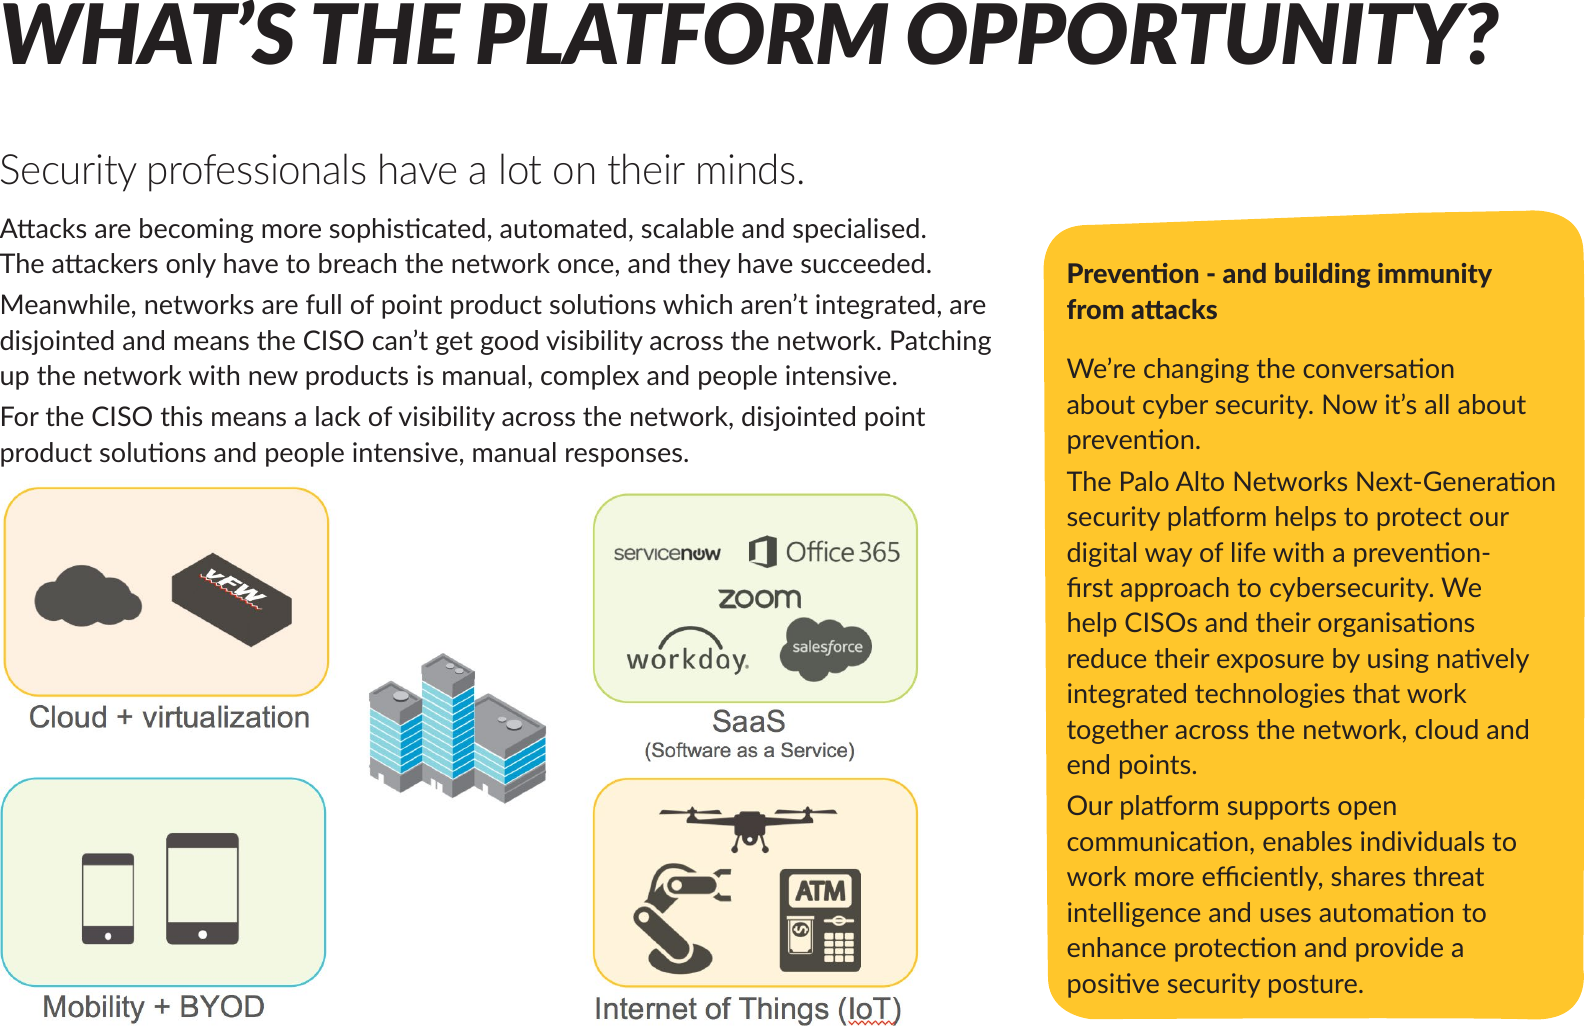 Page 2 of 9 - How-to-guide-palo-alto-networks-platform